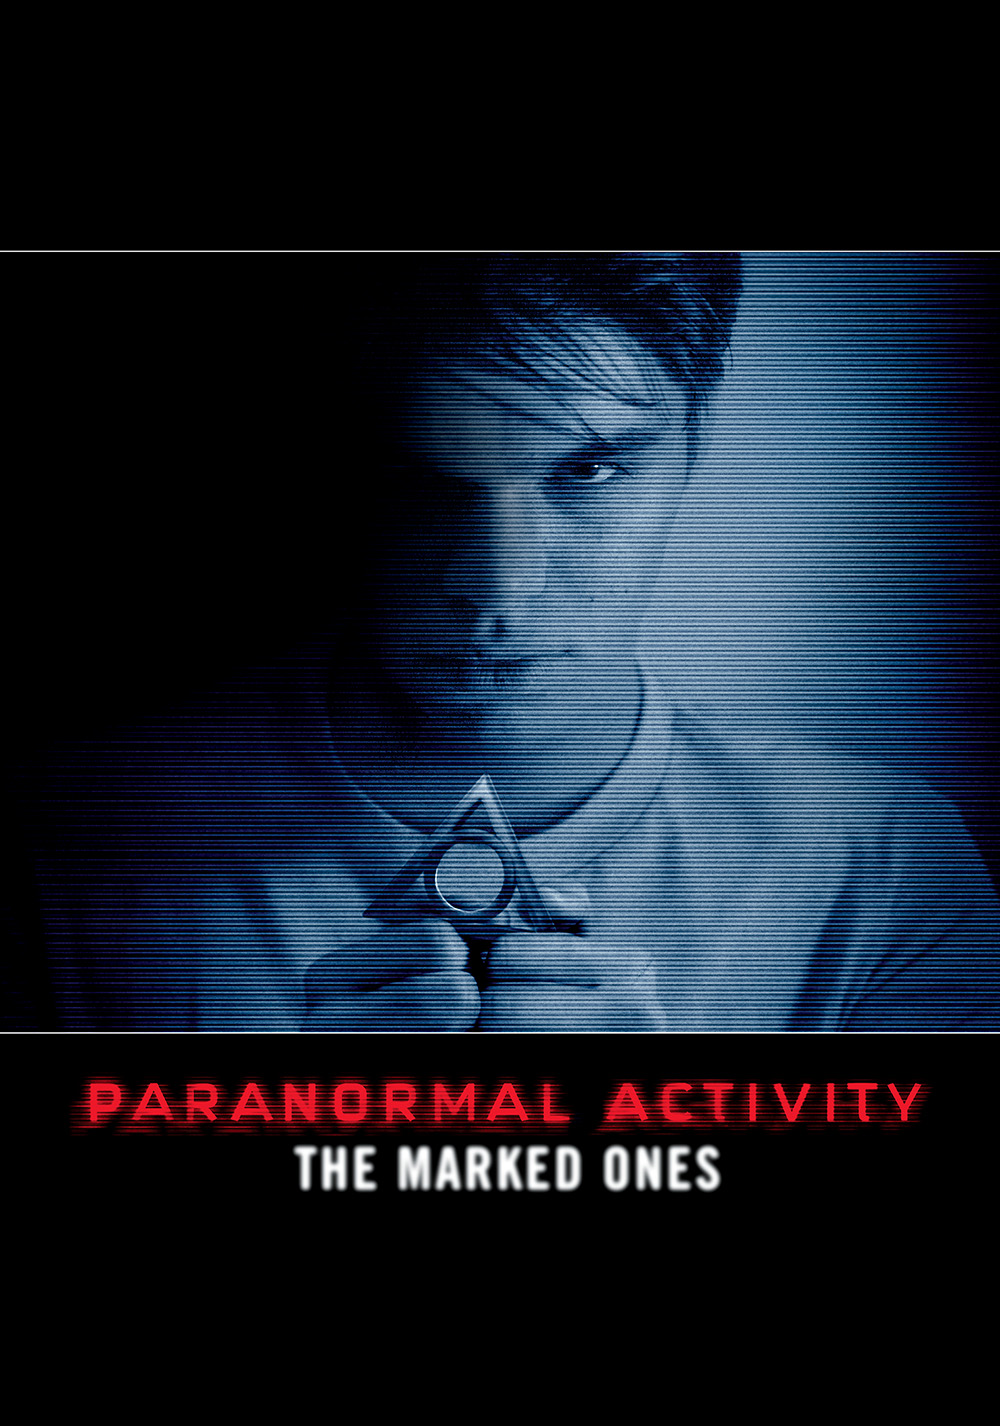 Paranormal Activity: The Marked Ones HD wallpapers, Desktop wallpaper - most viewed